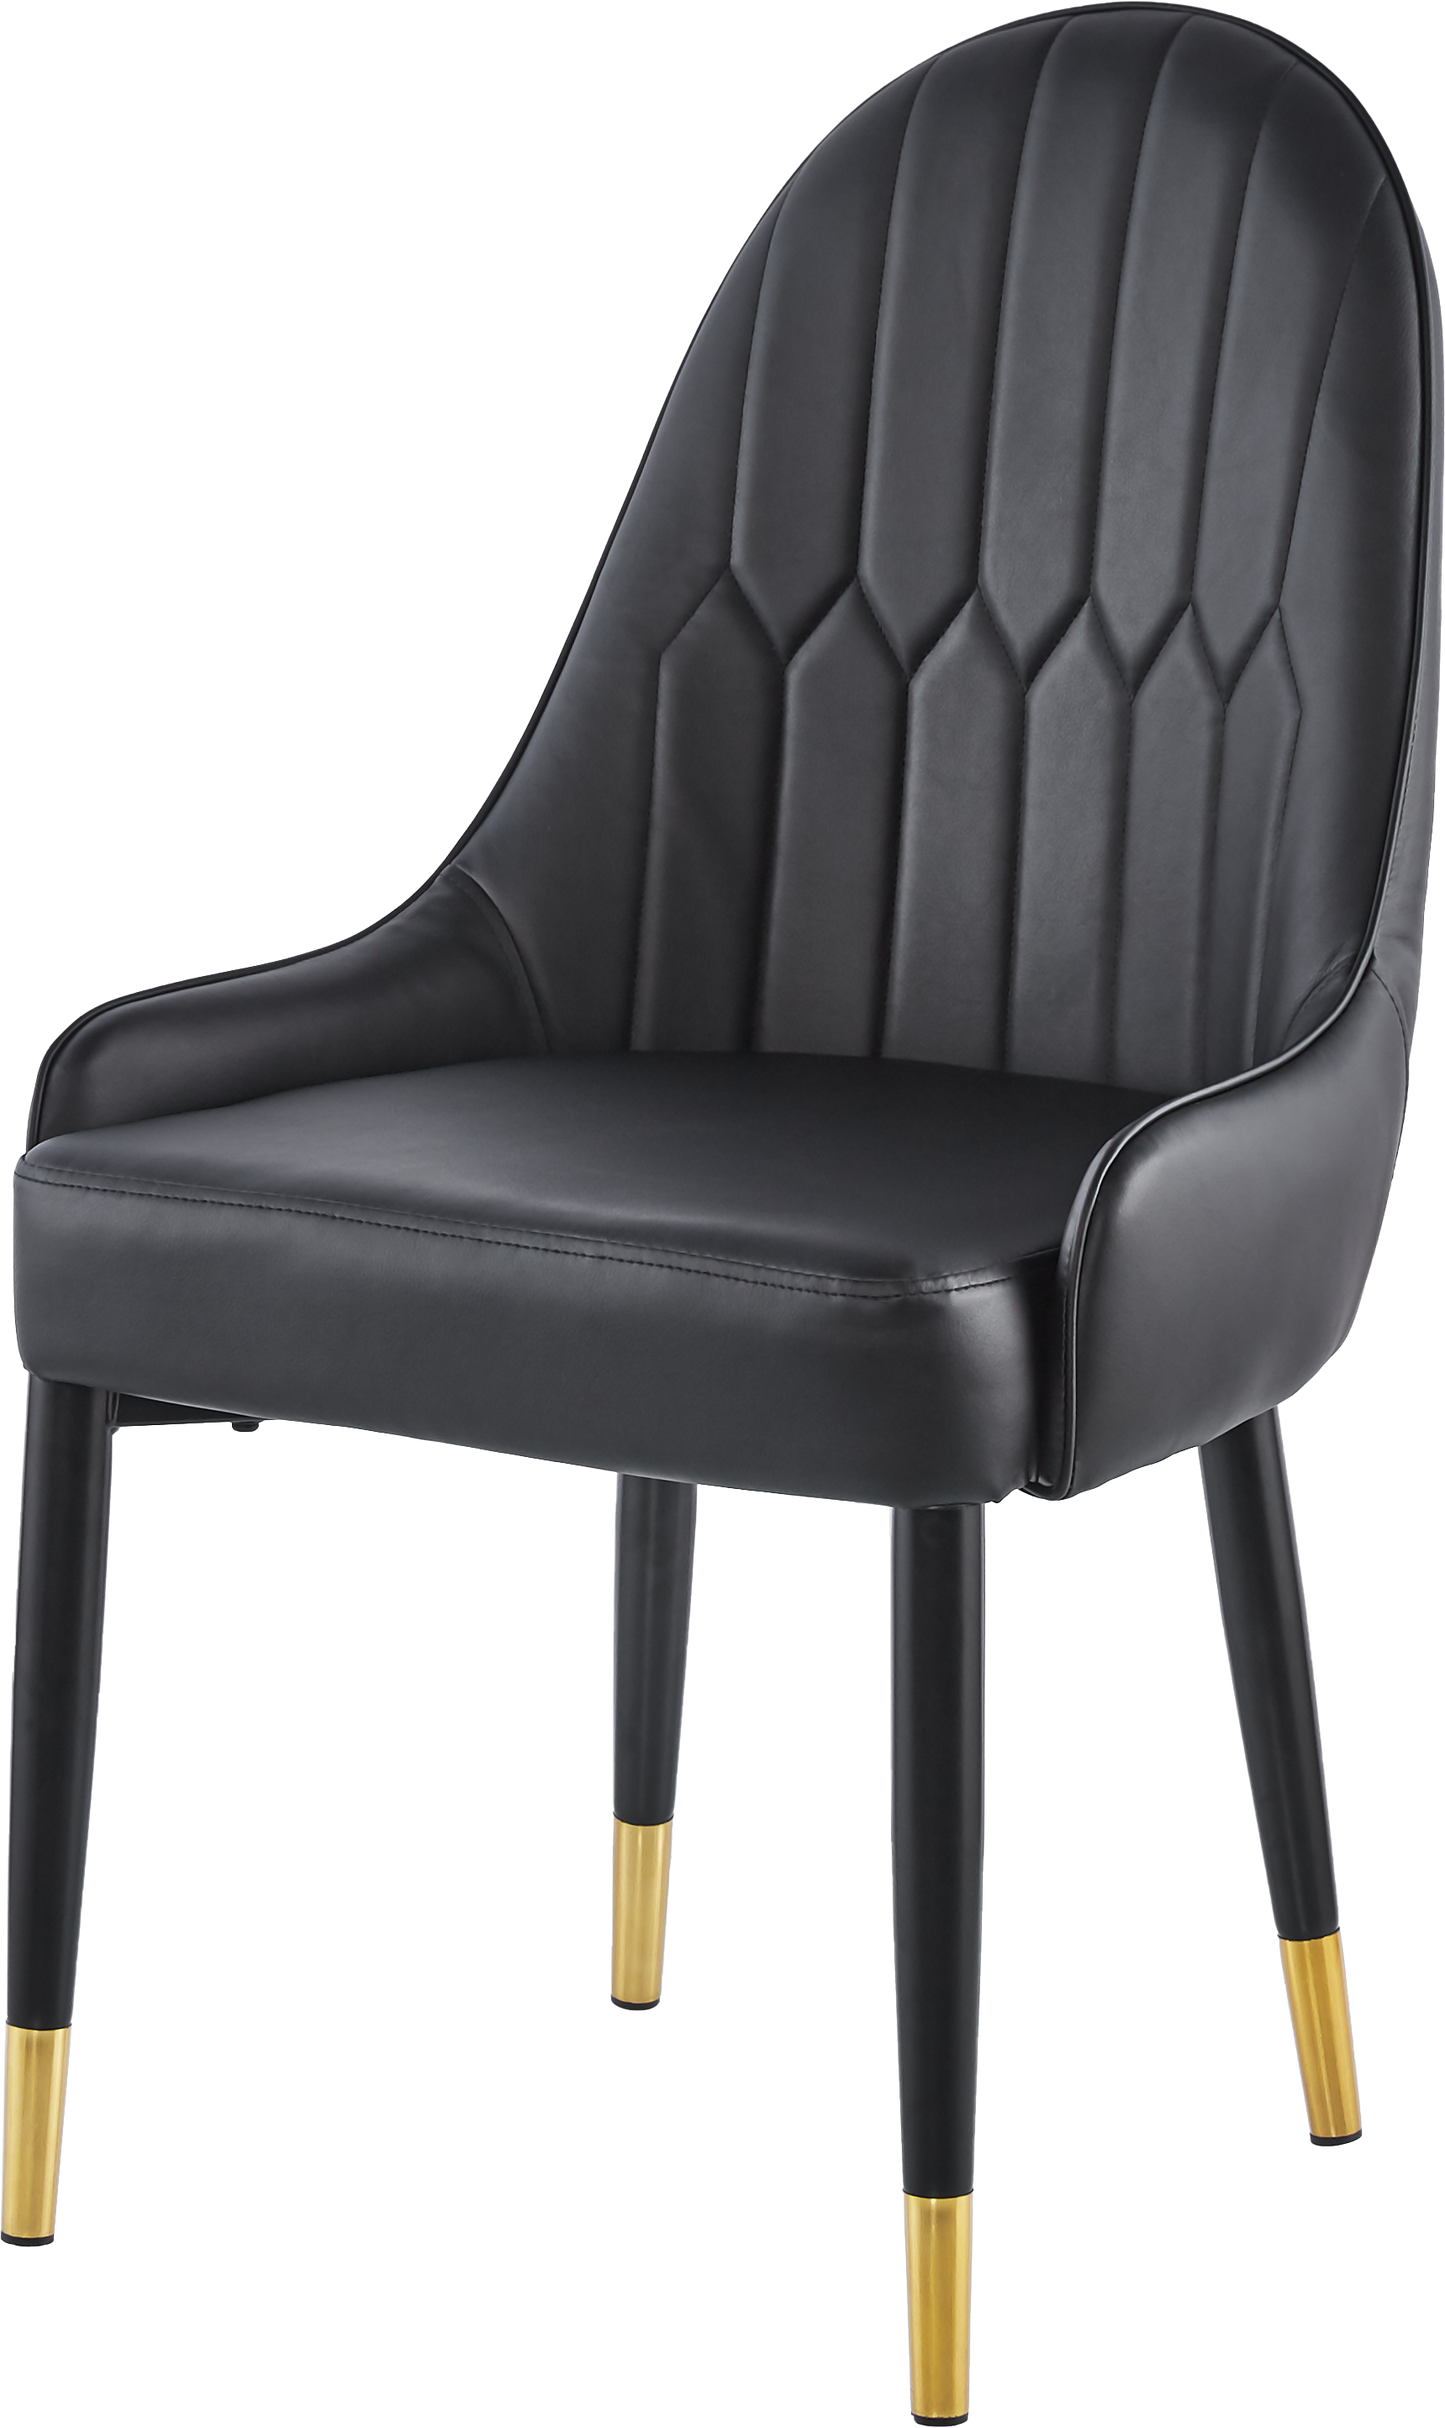 Modern Leatherette Dining Chair Set of 2, Upholstered Accent Dining Chair, Legs with Black Plastic Tube Plug